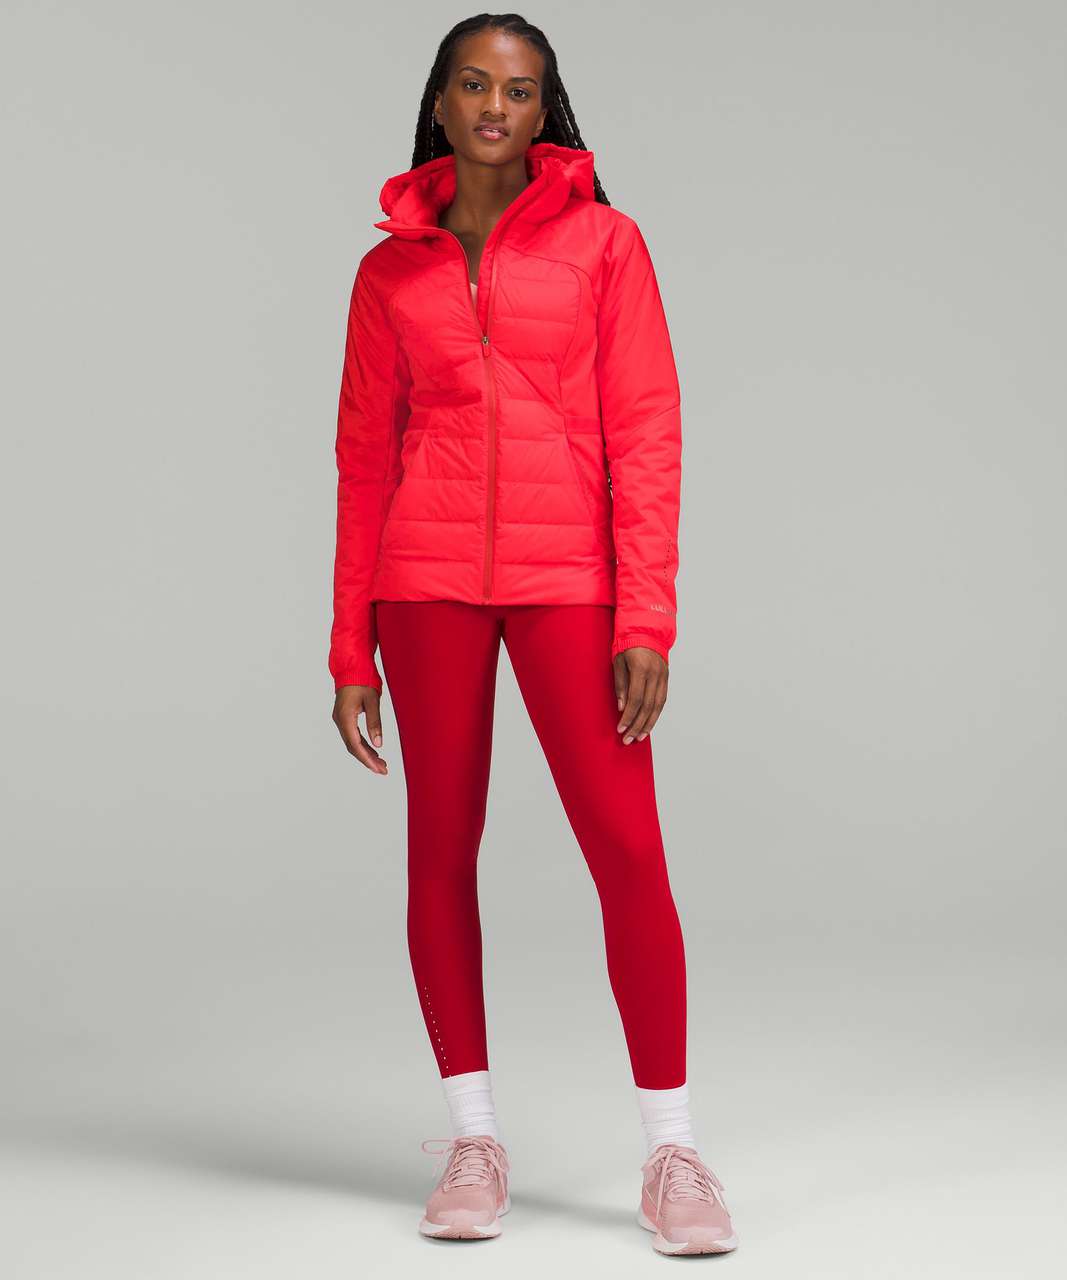 Lululemon Down for It All Jacket - Carnation Red